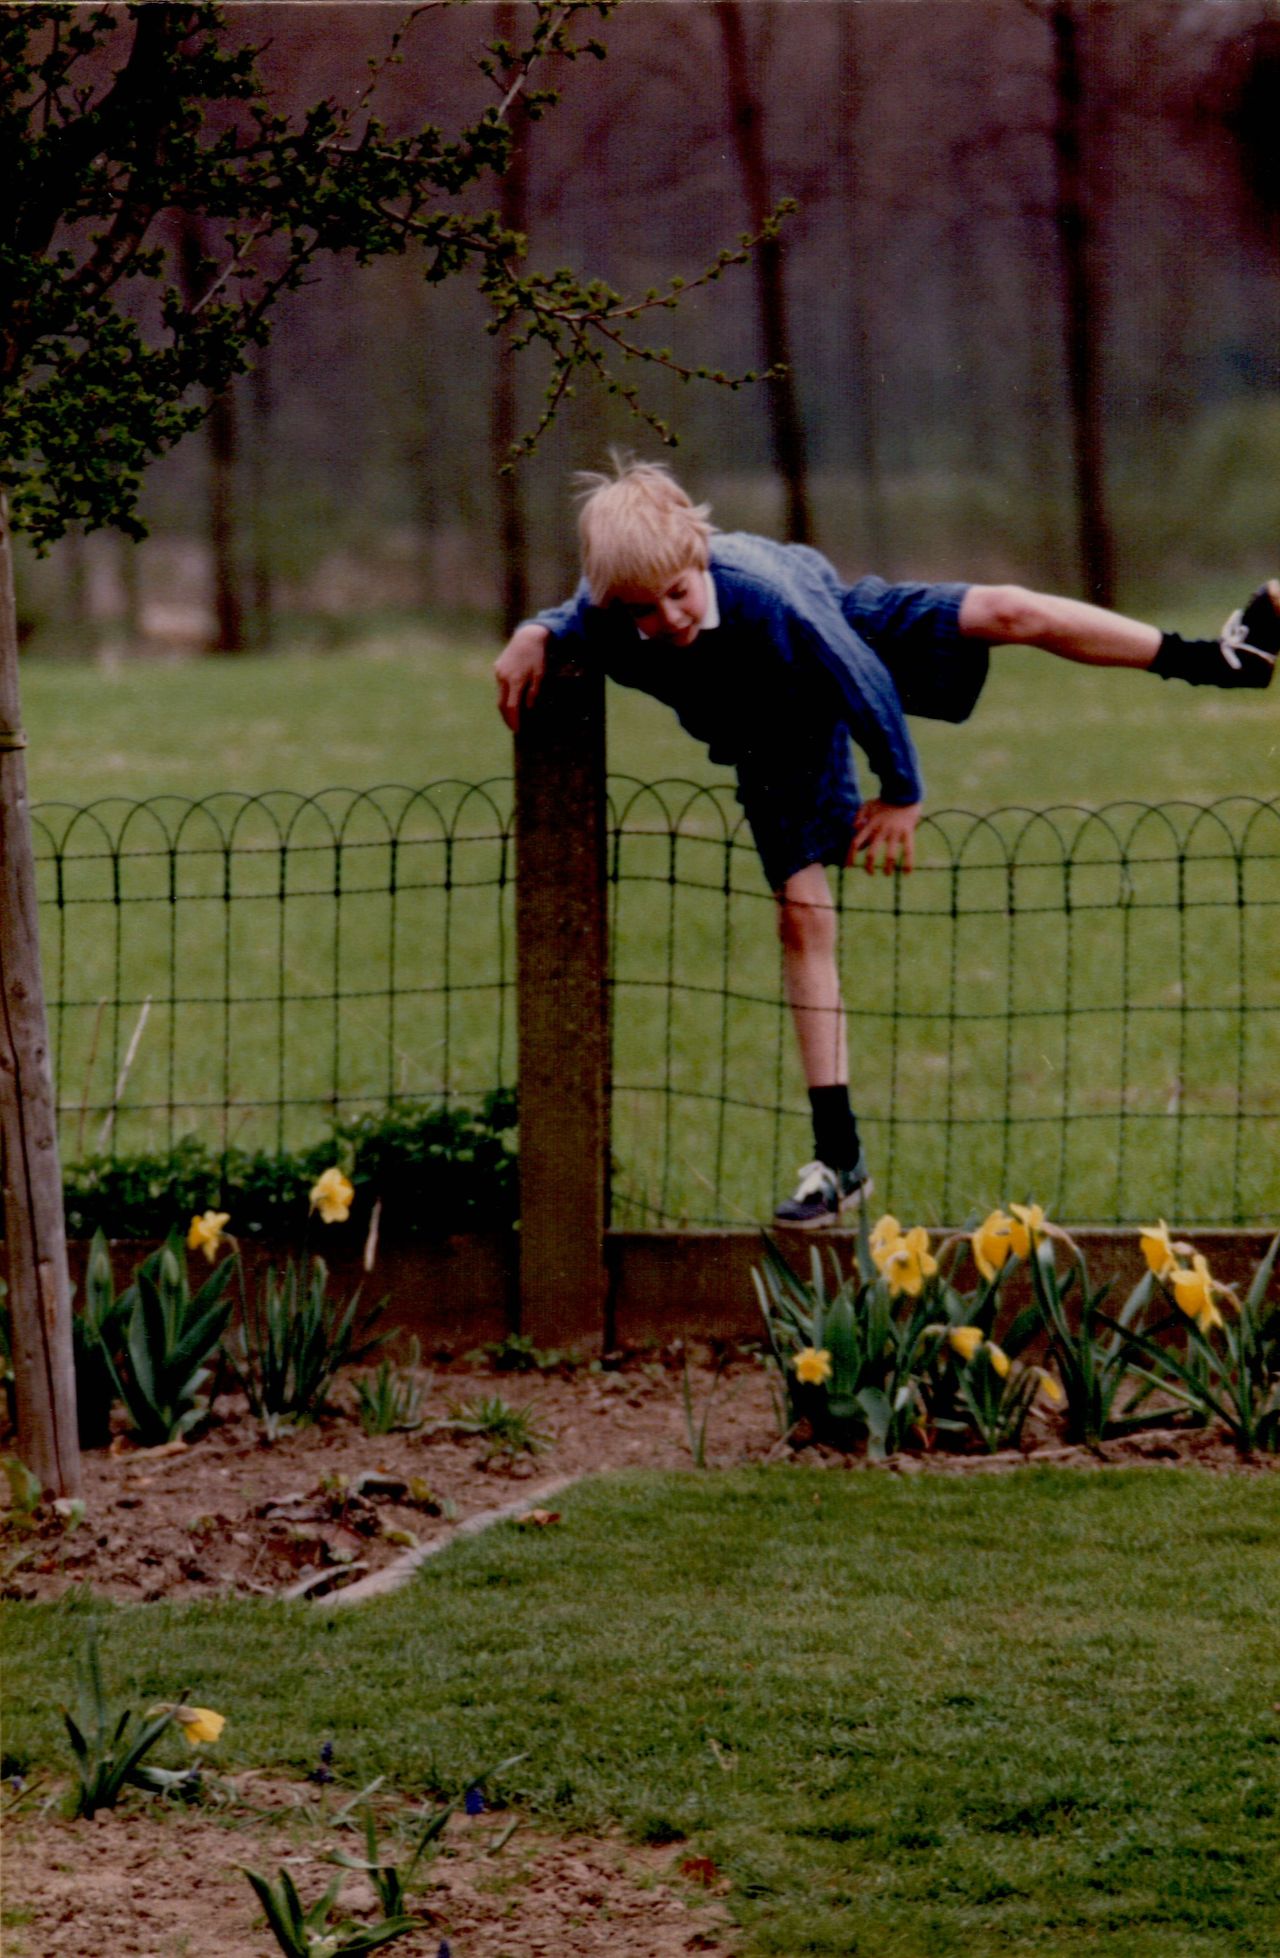 Dries jumping a fence